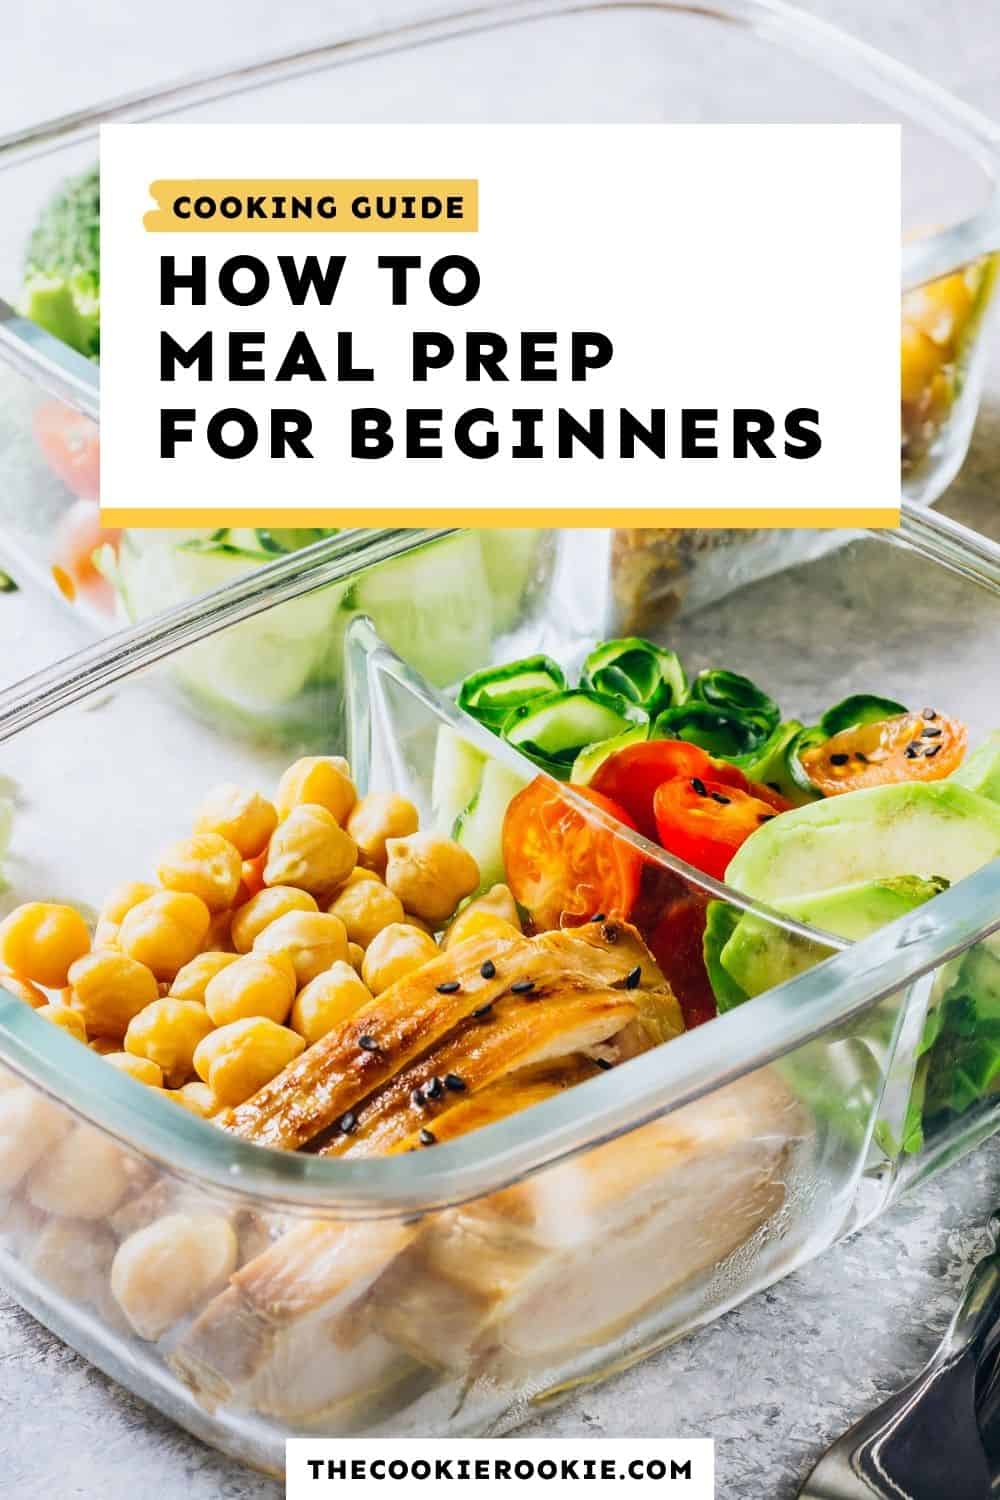 How To Meal Prep Ideas And Recipes For Beginners Nutrition Line | Free ...